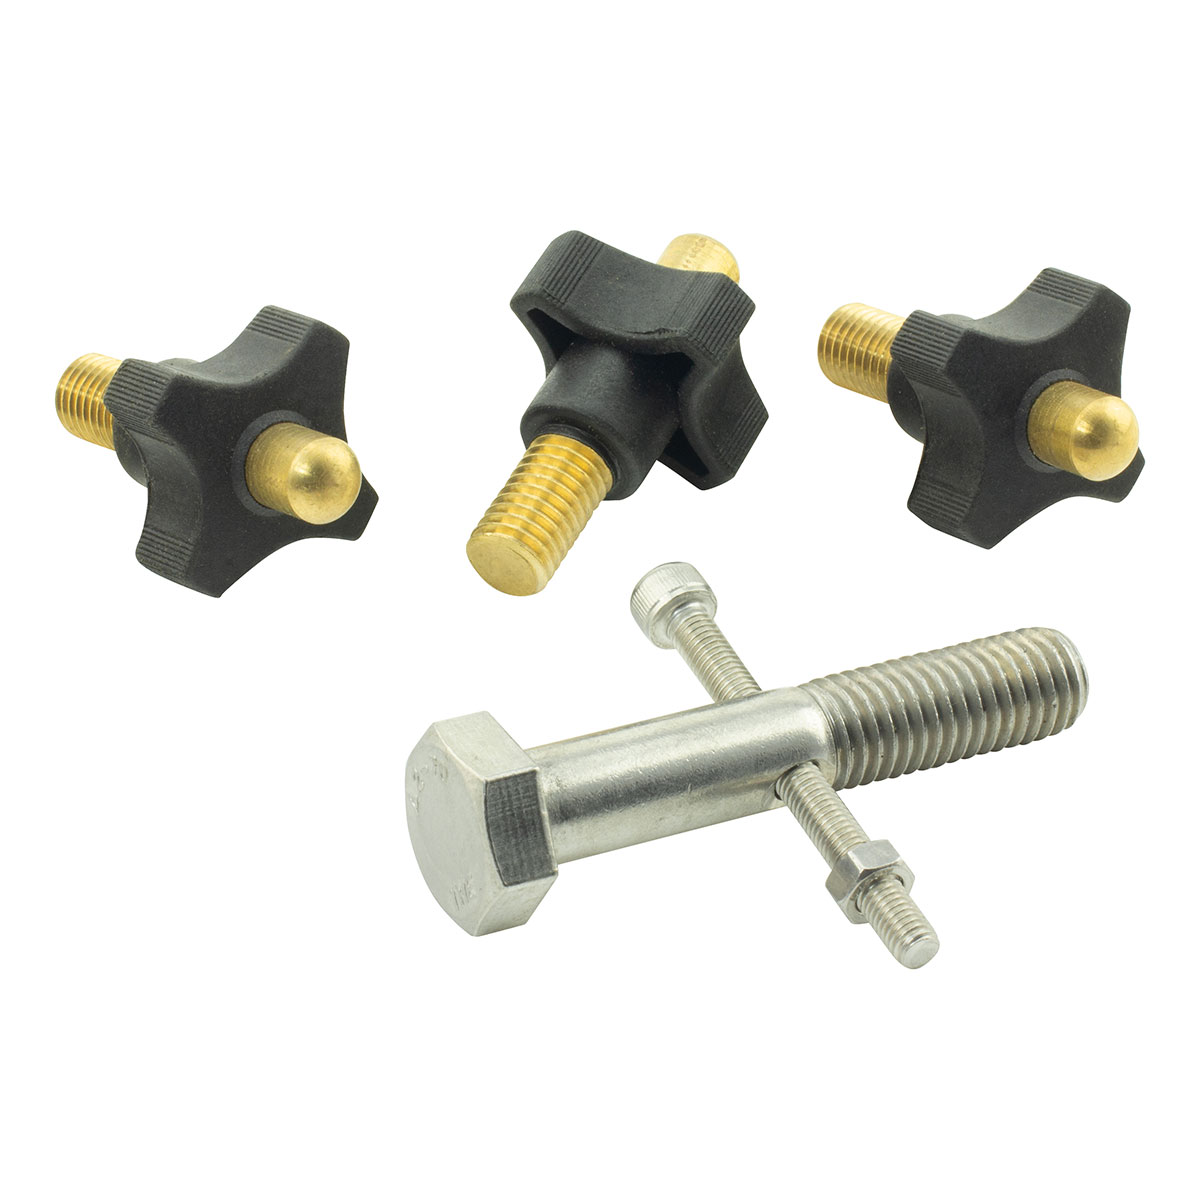 iOptron Star Knobs (3 pcs) with Centre Post